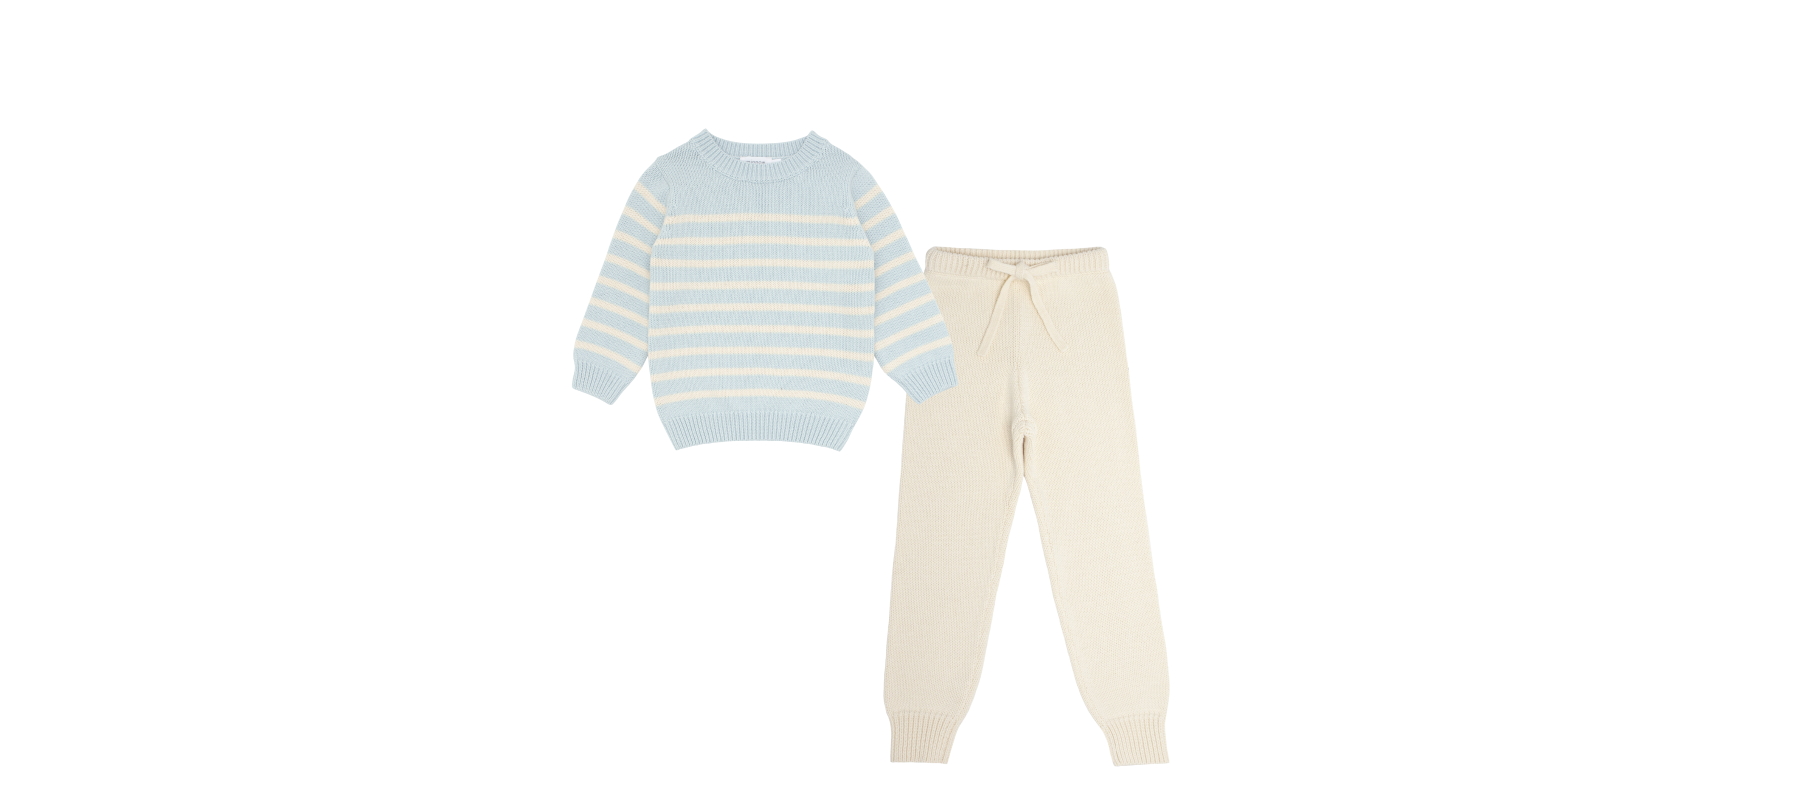 minnow product images of the blue and cream sweater and cream knit pants